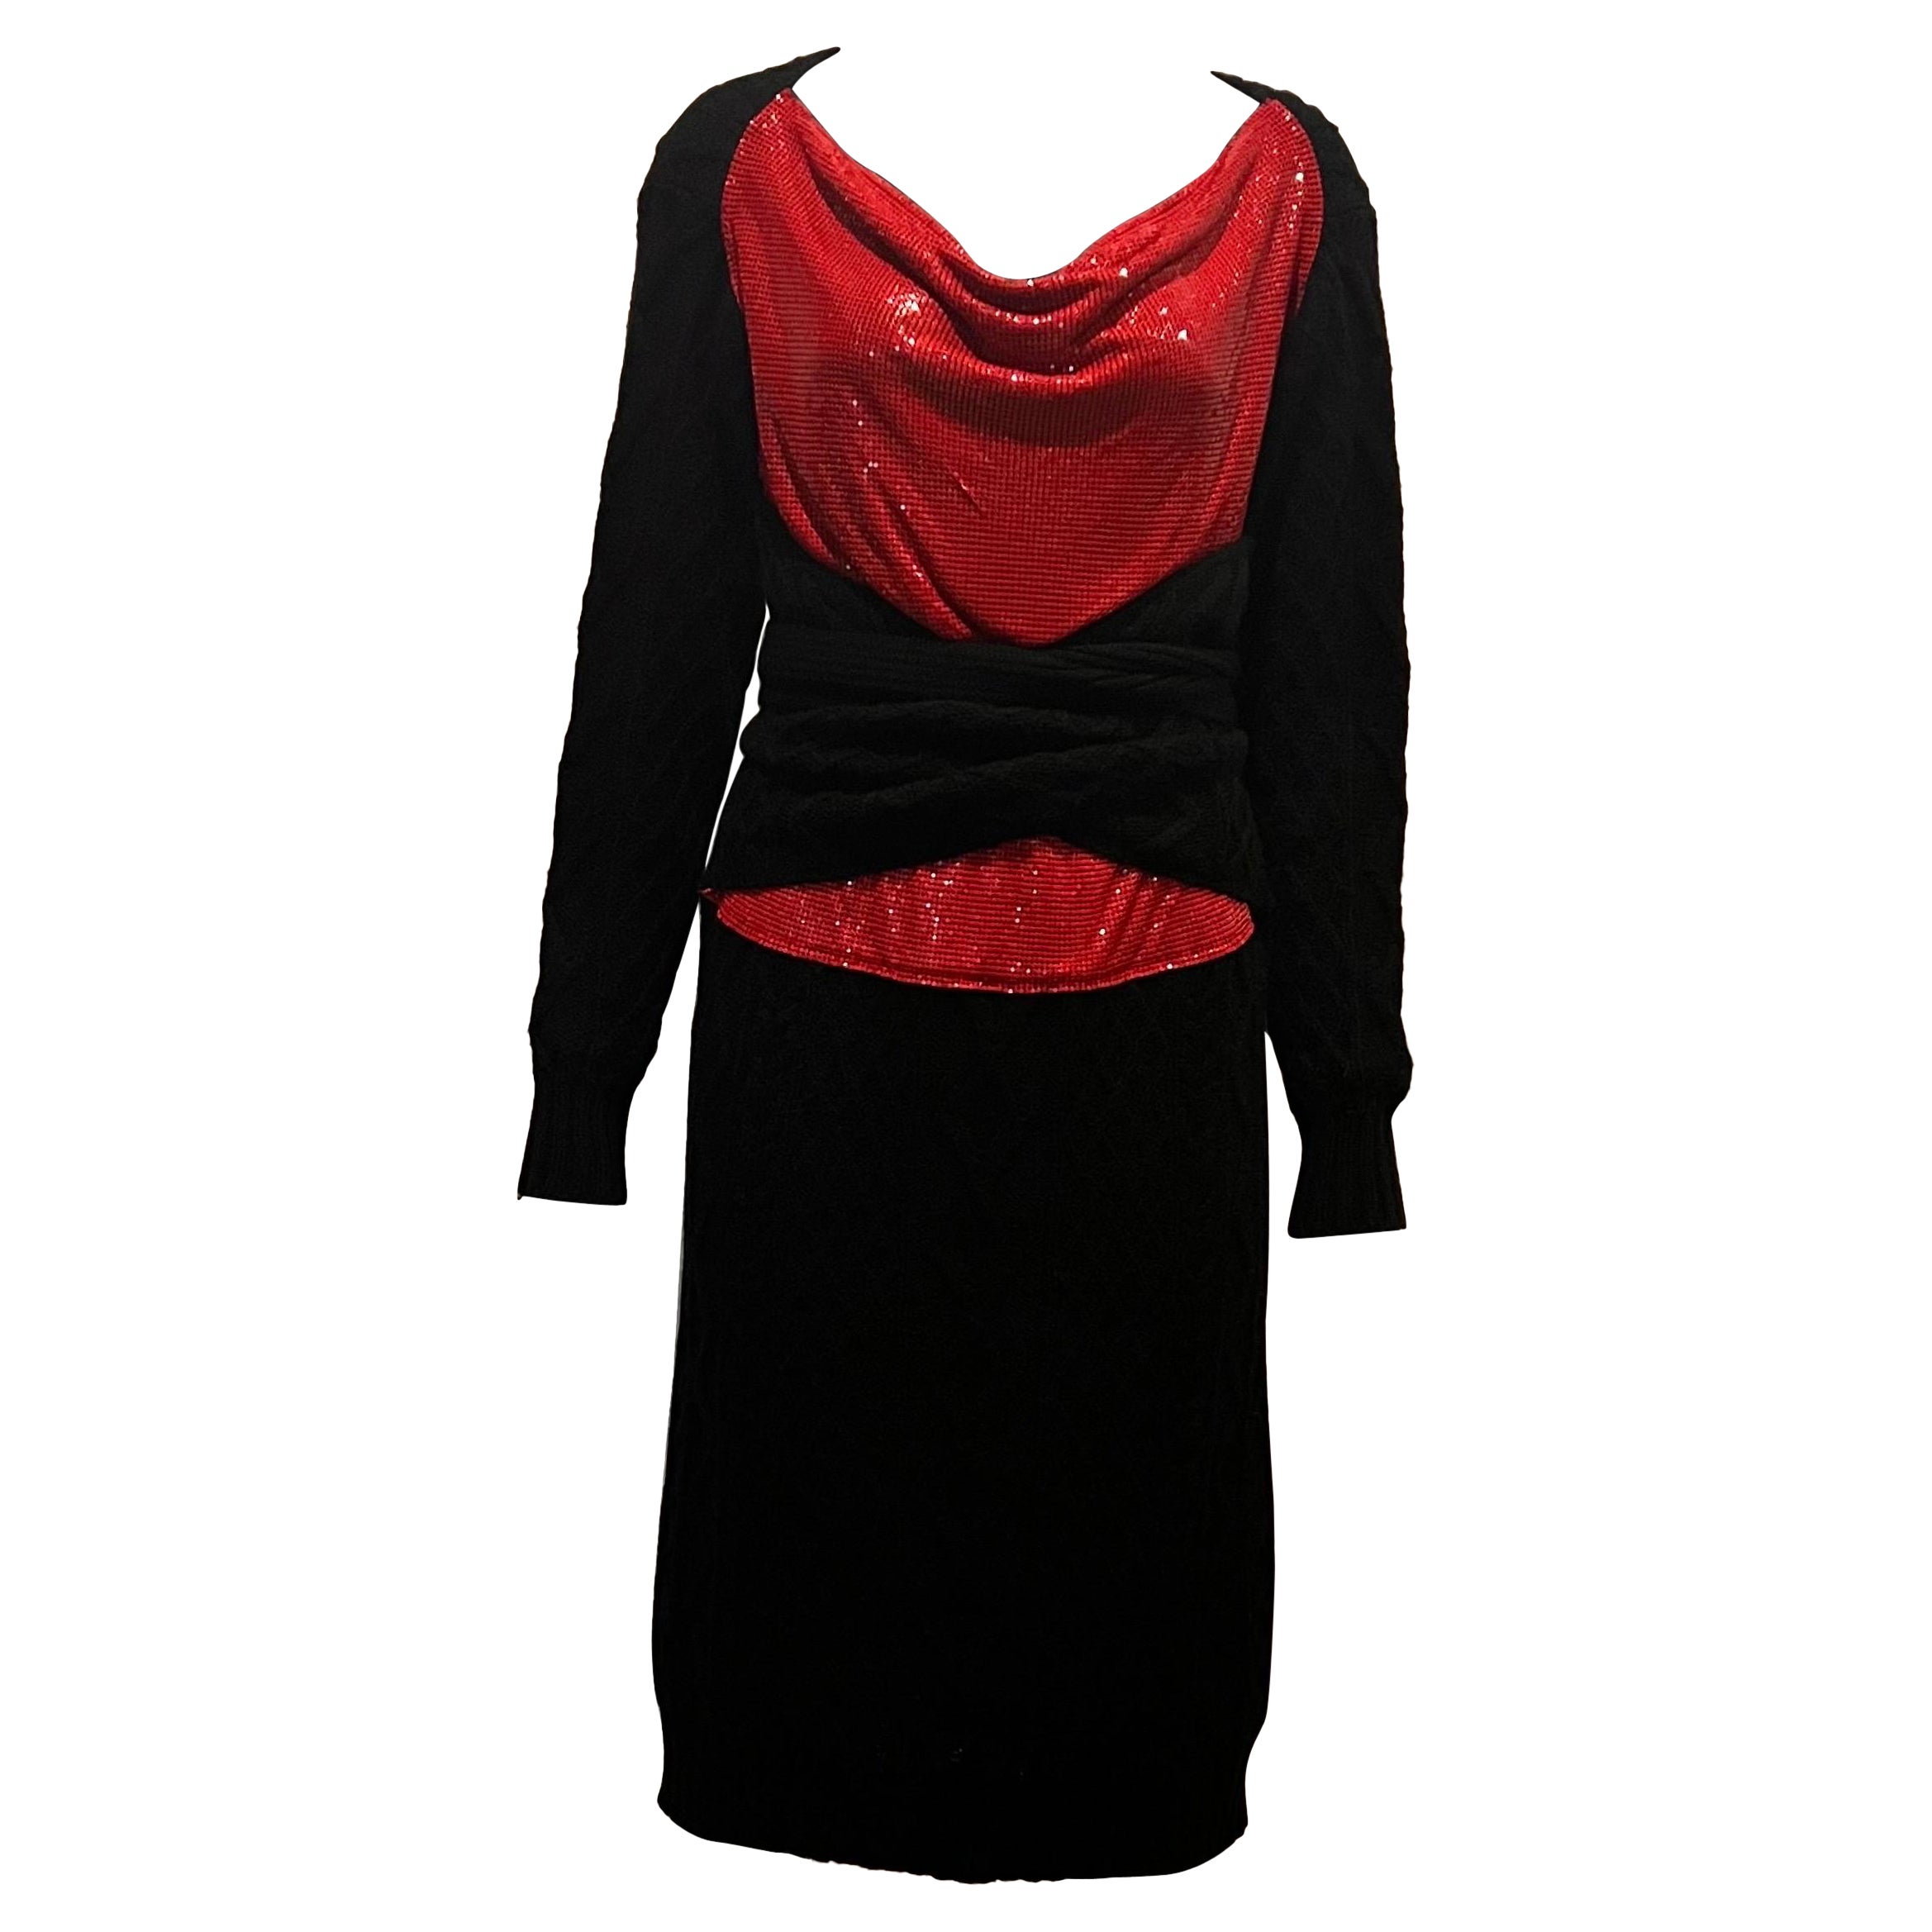 Vintage 1990’s Jean Paul Gaultier cable knit dress with glomesh cowl front  For Sale